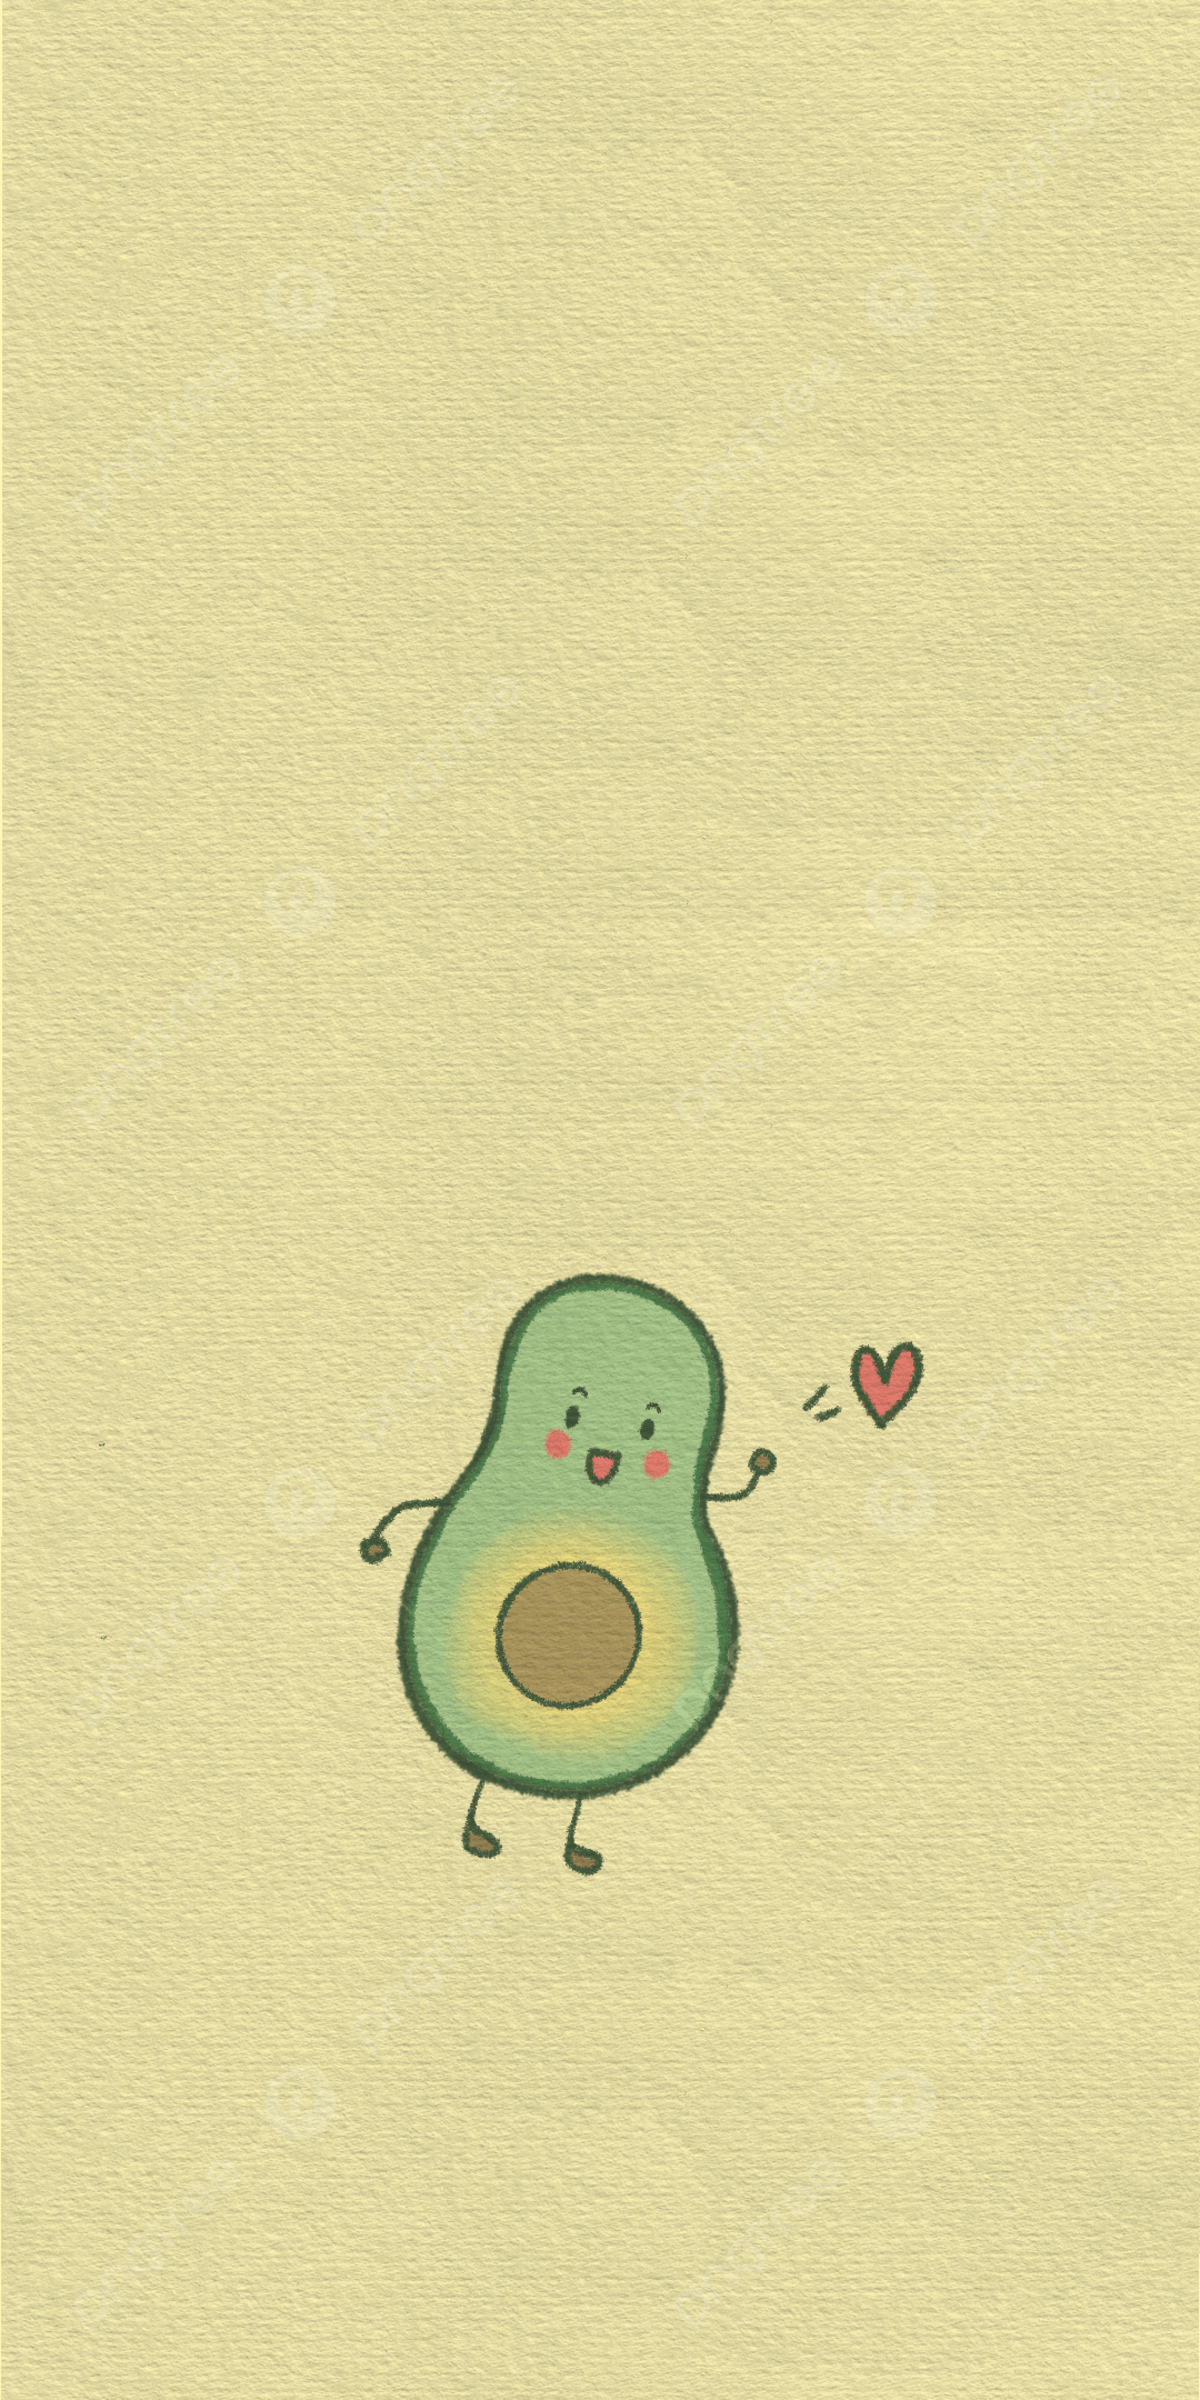 Paper Texture Texture Cute Avocado Inspirational Mobile Wallpaper Background, Paper, Lovely, Inspiring Background Image for Free Download